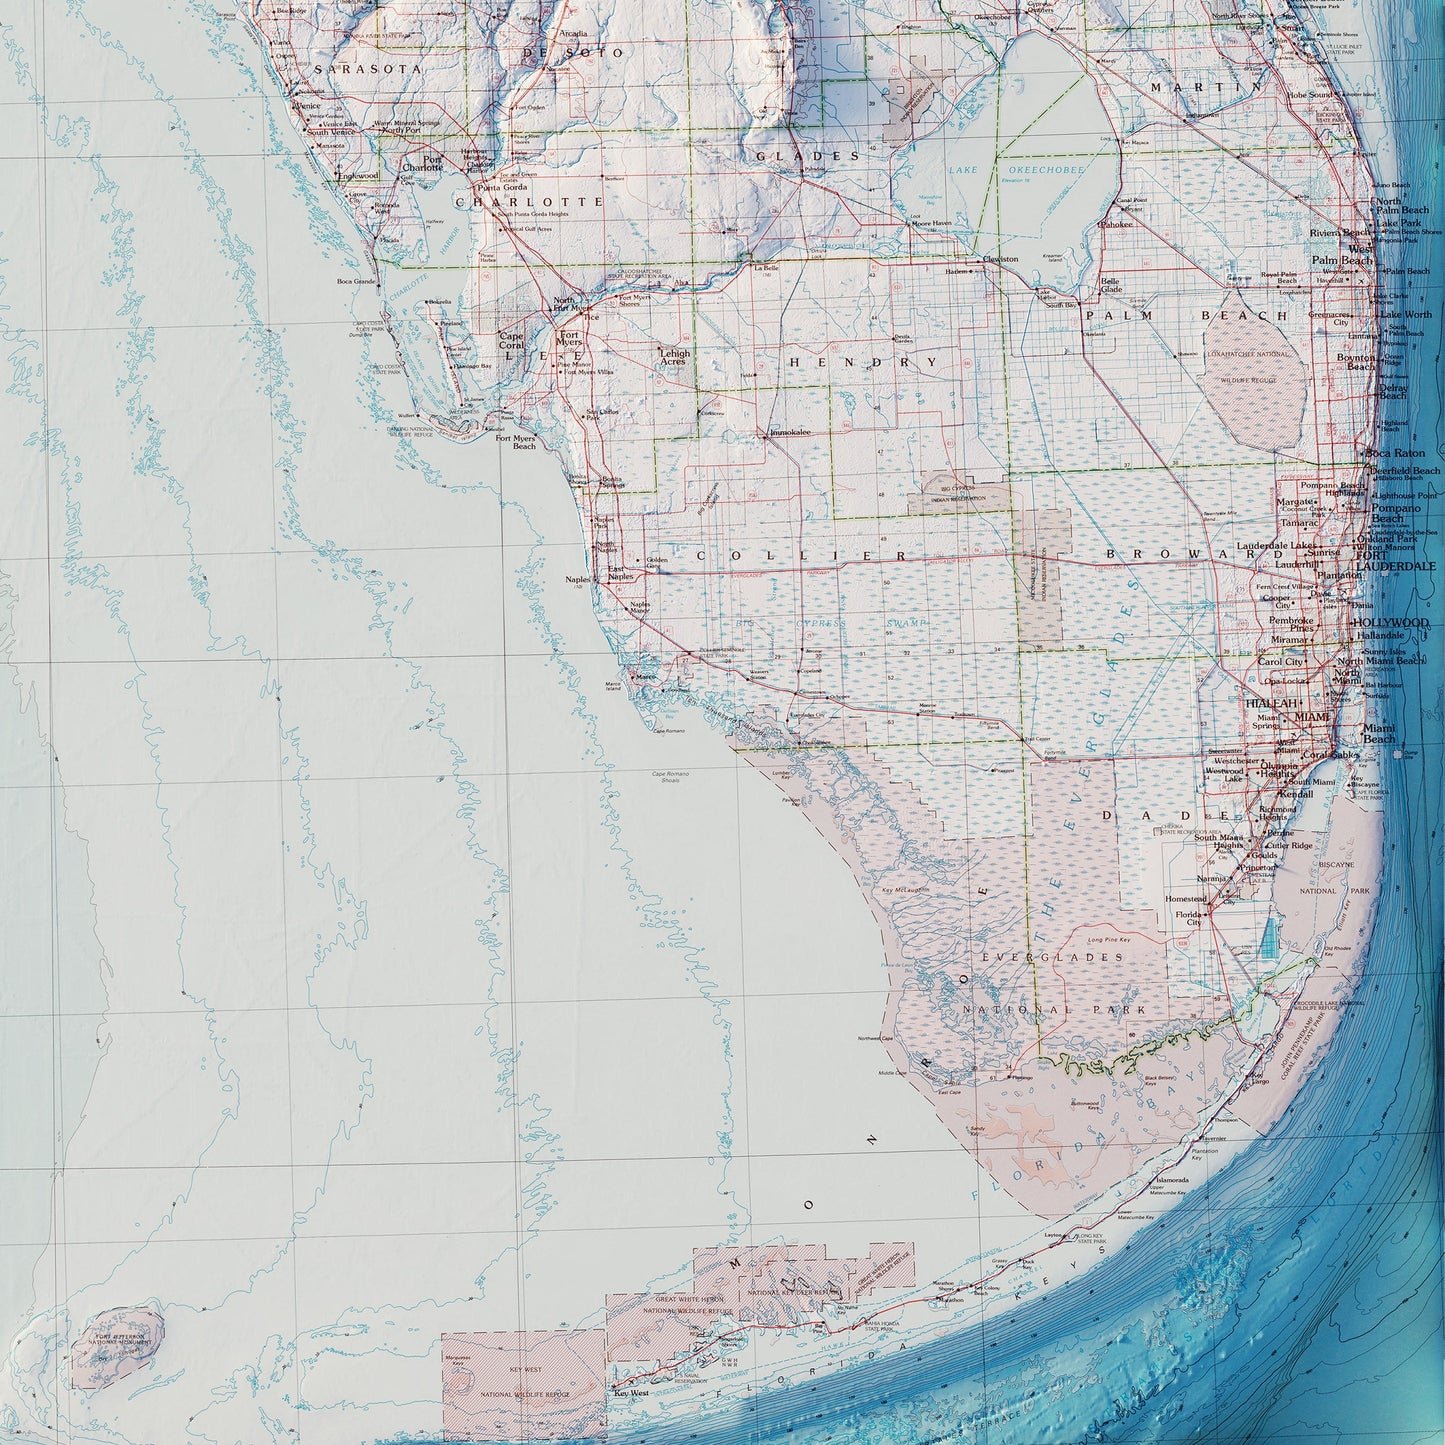 Florida 1989 Shaded Relief Map